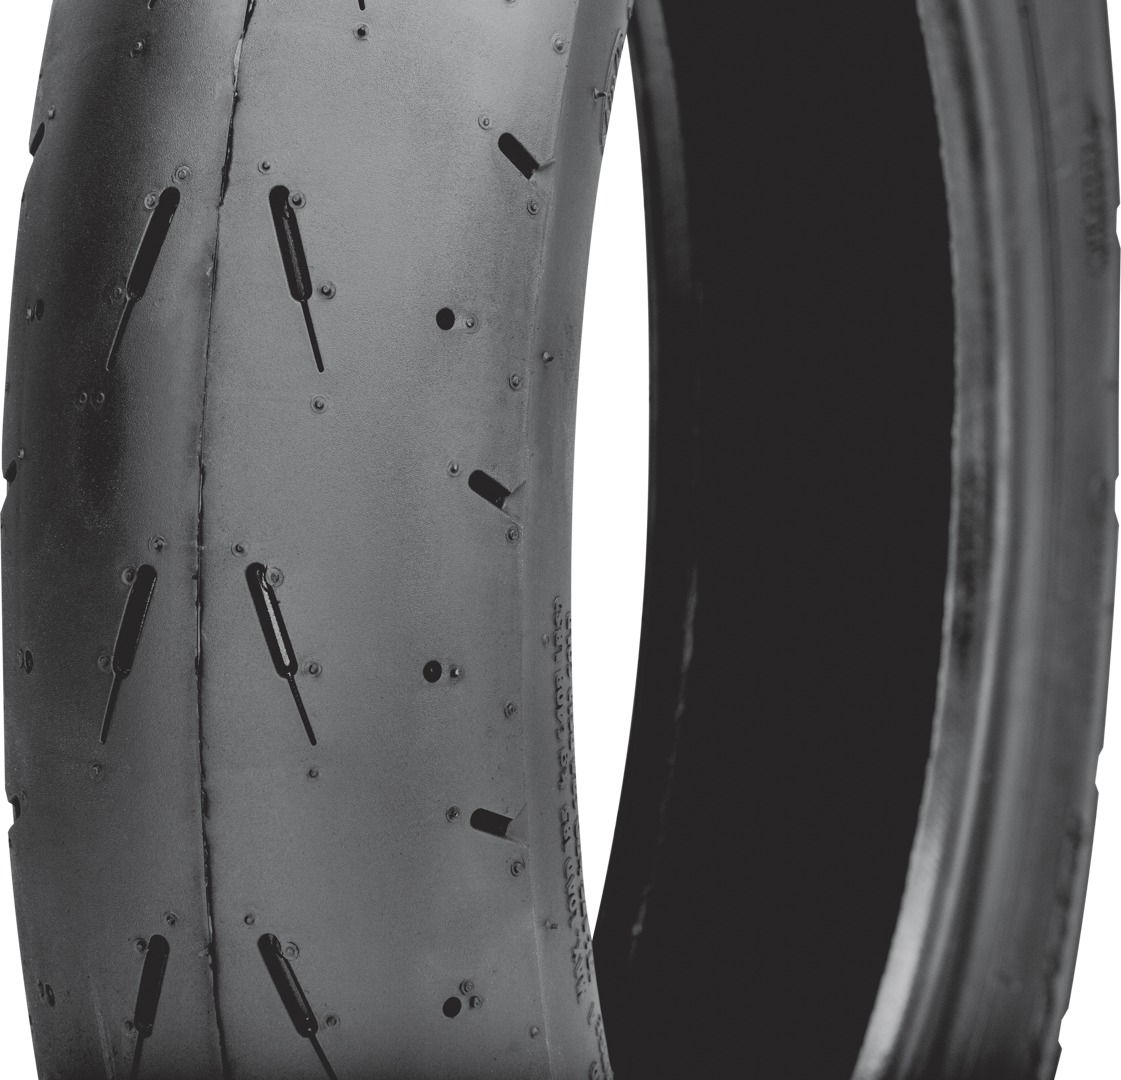 Soft Compound 100/90-12 Front Tire - SR003 "Stealth" 49J - The Ultimate DOT Legal Scooter & Mini Racing Tire - Click Image to Close